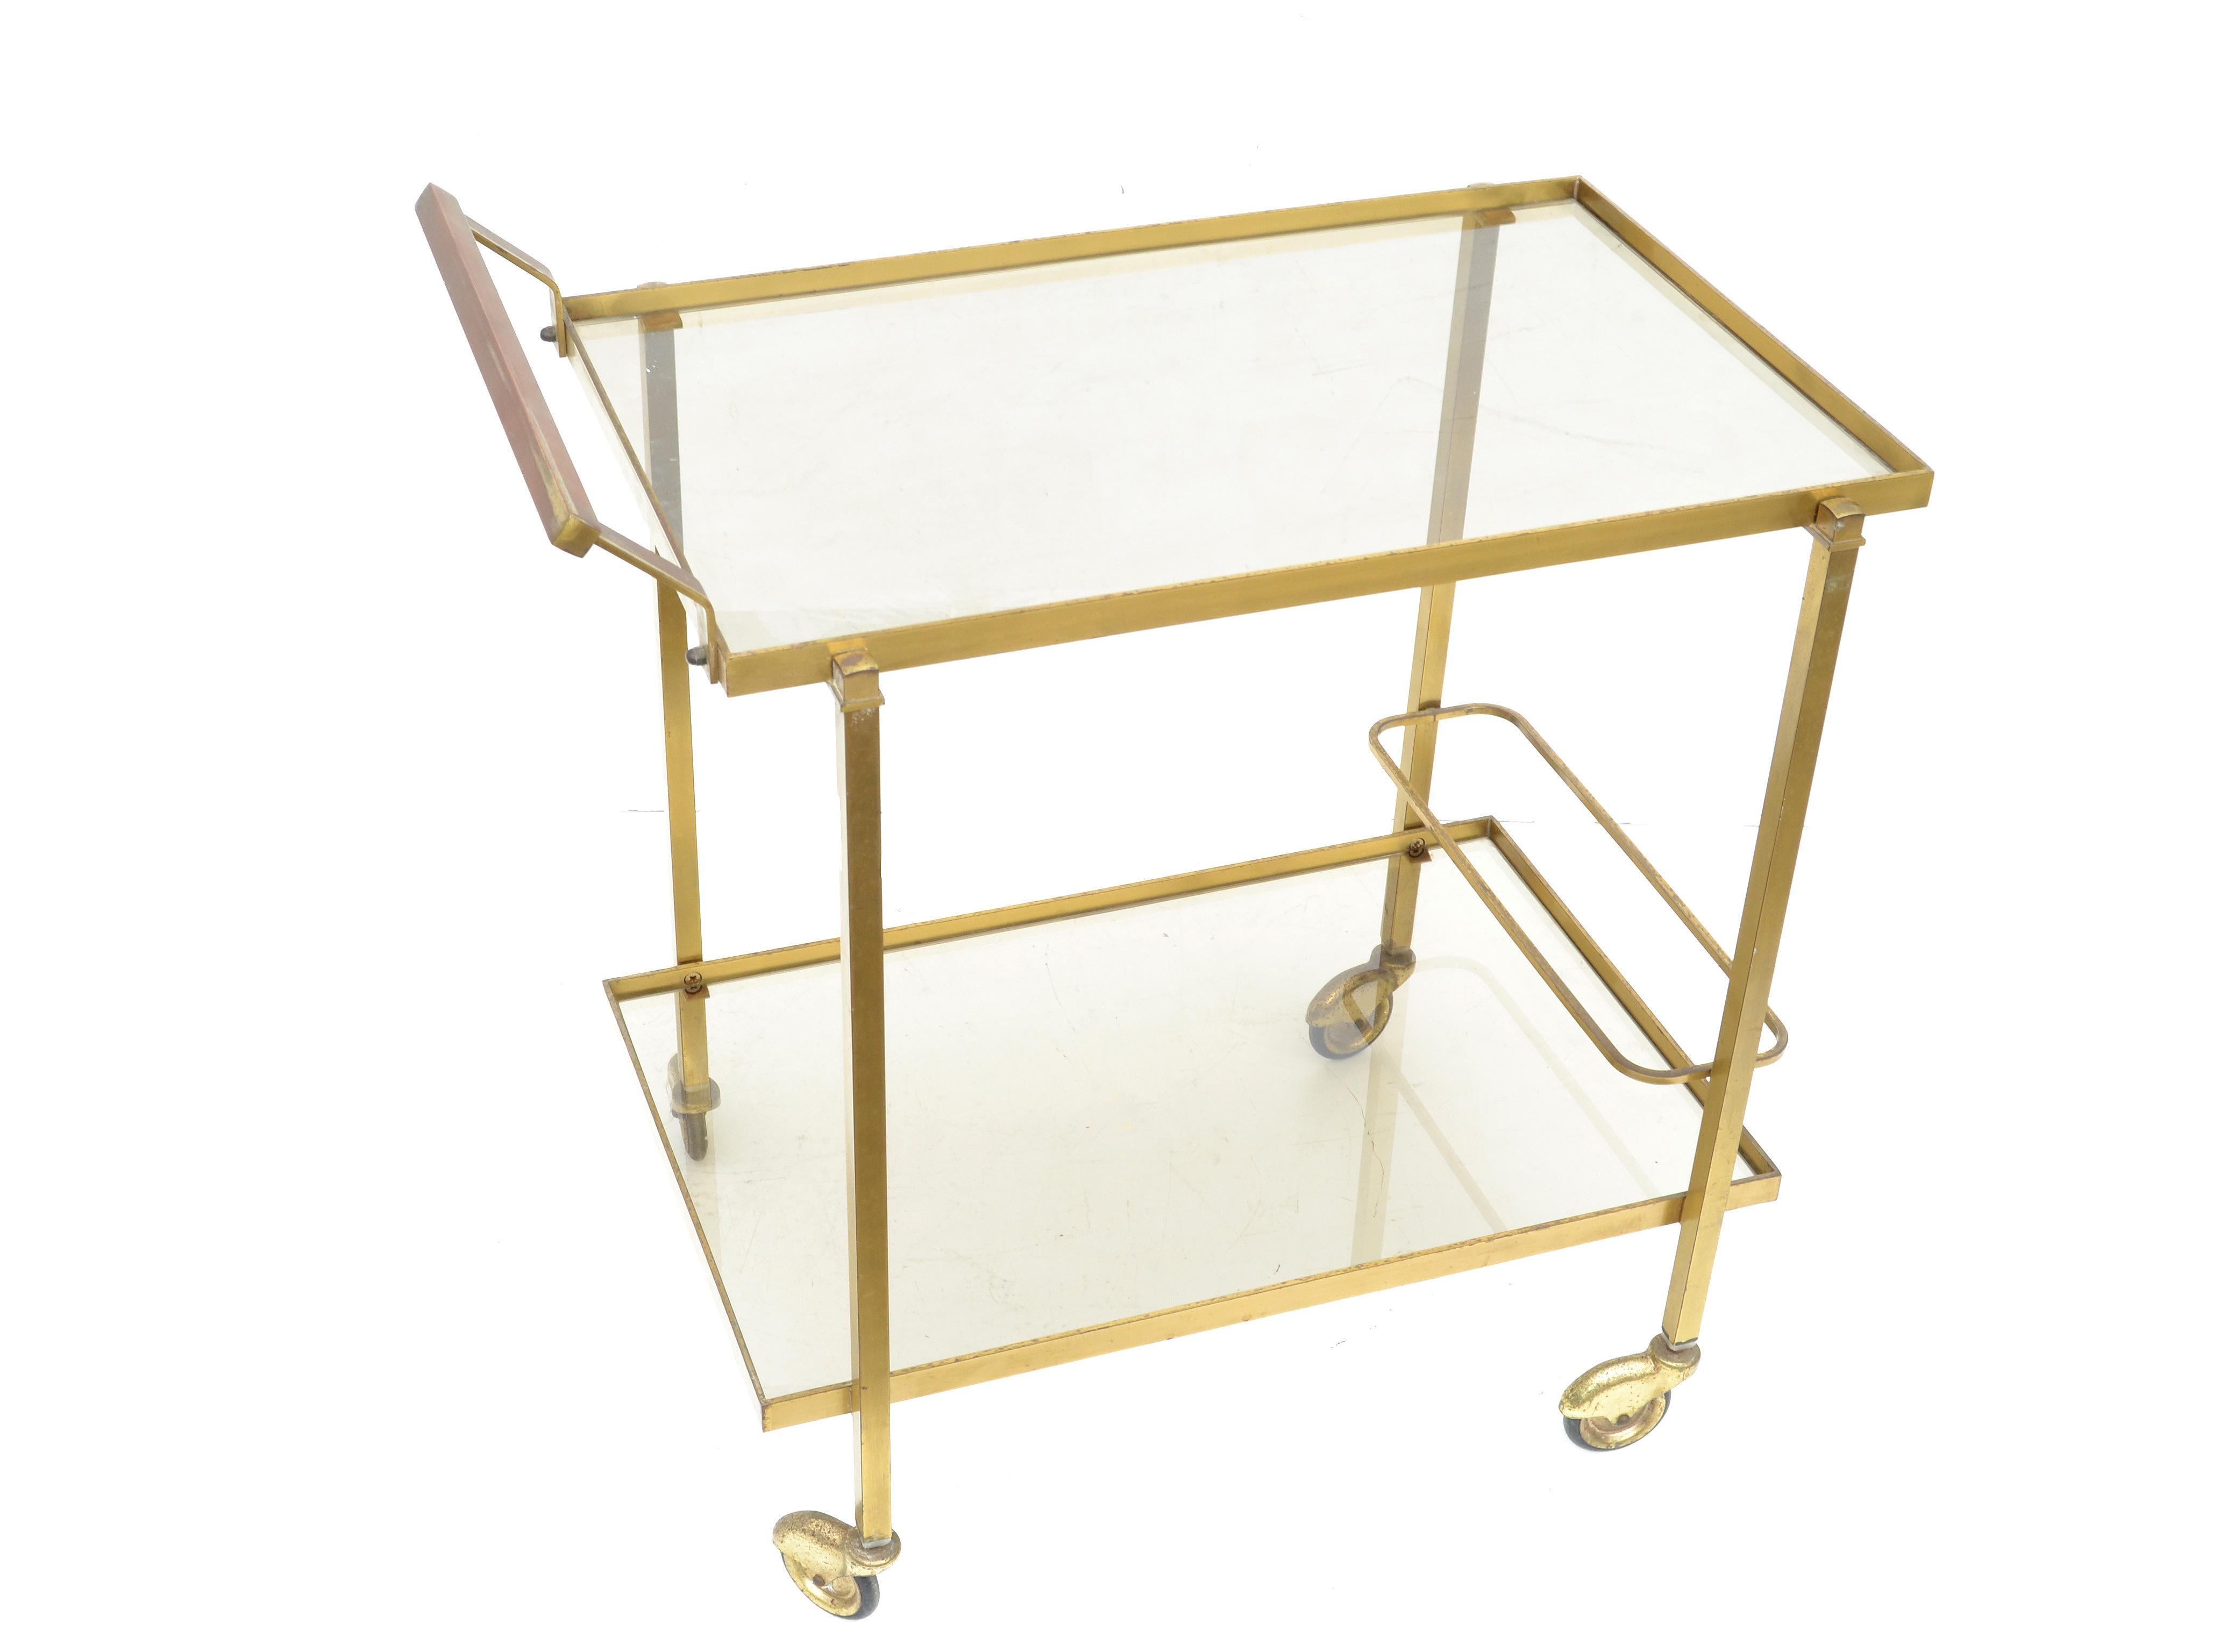 French Mid-Century Modern brass bar cart features two-tier glass shelves by Guy Lefevre for Maison Jansen. 
Made in the 1960 in patinated brass with smoked glass shelves and all original wheels.
Measures: 8 inches H from the floor to the 1st tier,